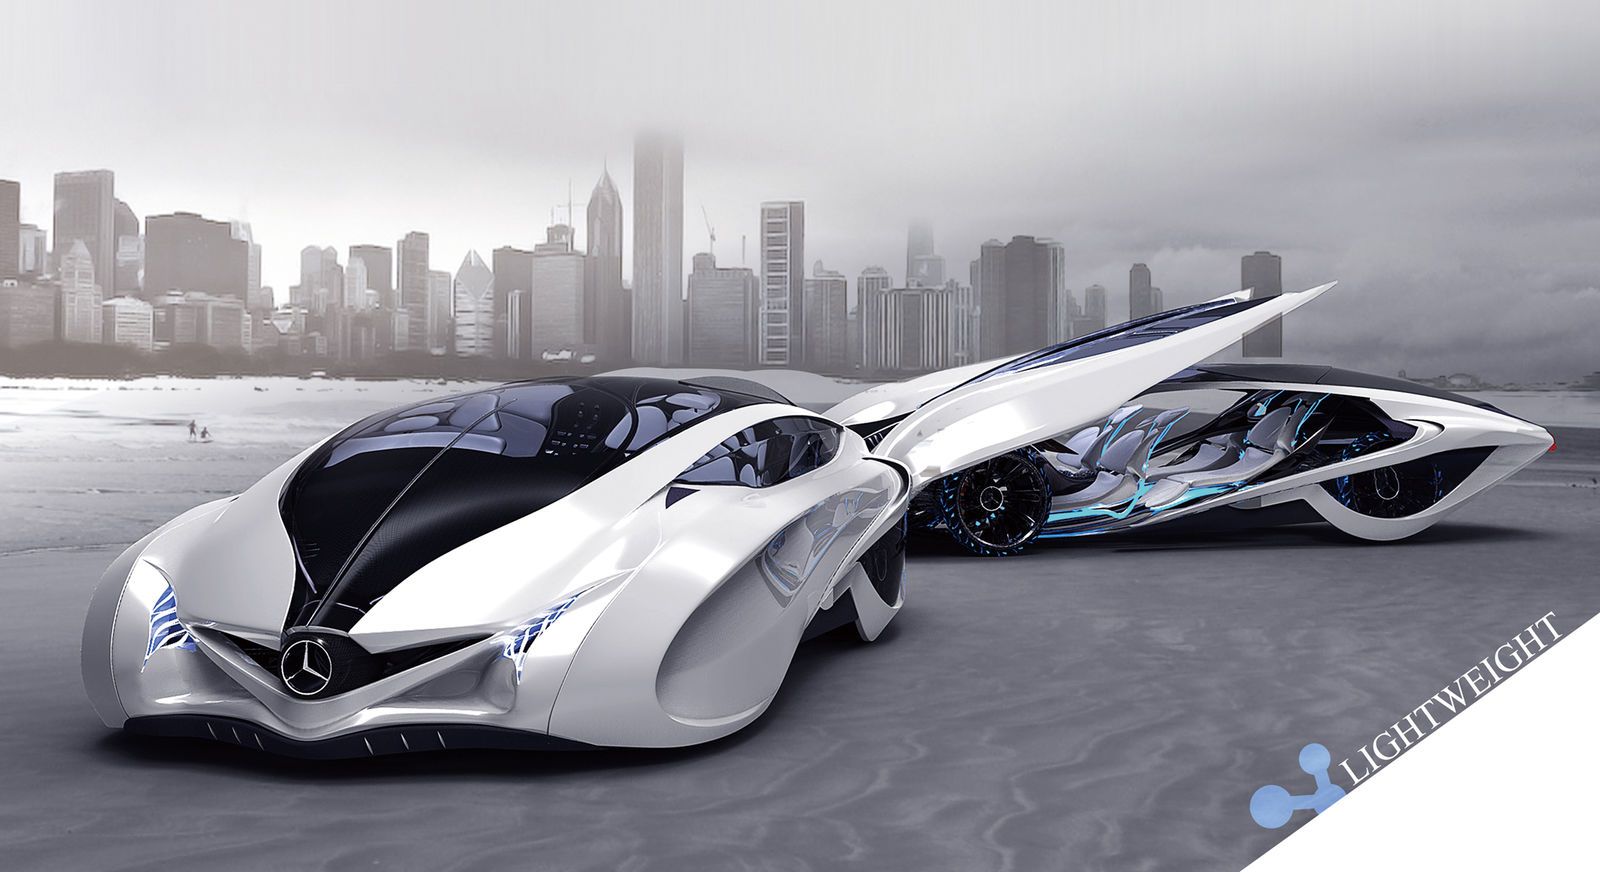 Amazing futuristic car designs from racing cars to rescue vehicles image 34